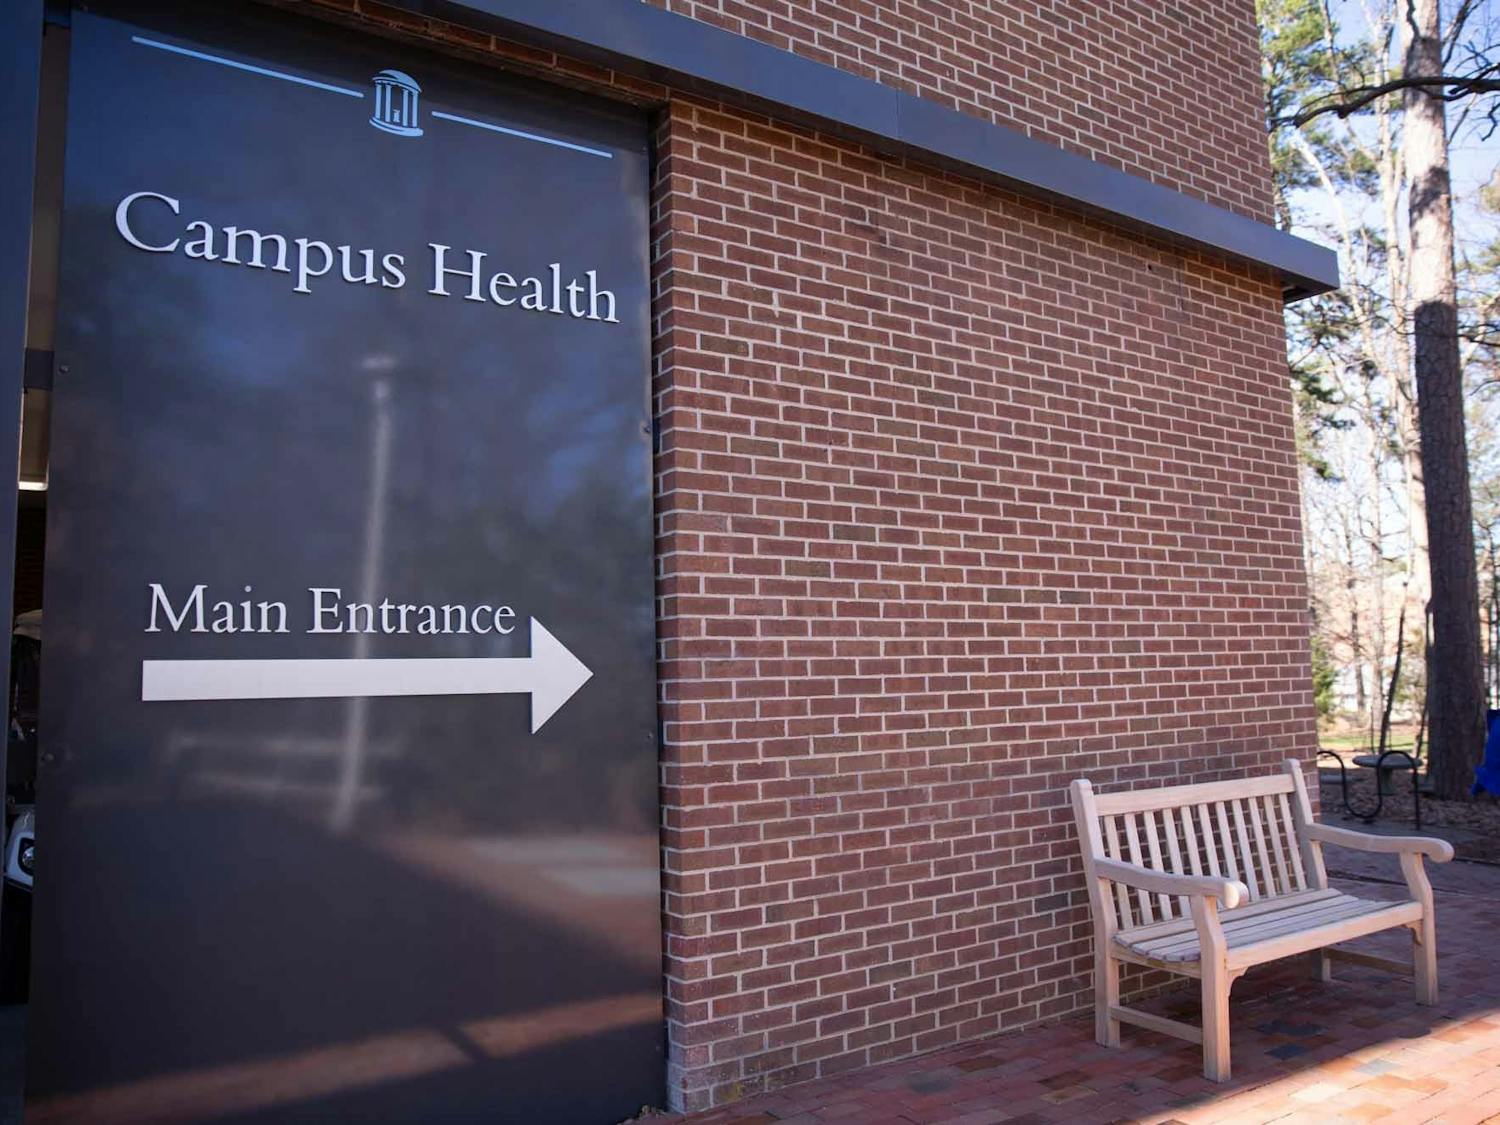 An AlertCarolina message announced a UNC-Chapel Hill student has a confirmed case of the mumps on Wednesday, Jan. 22, 2020.